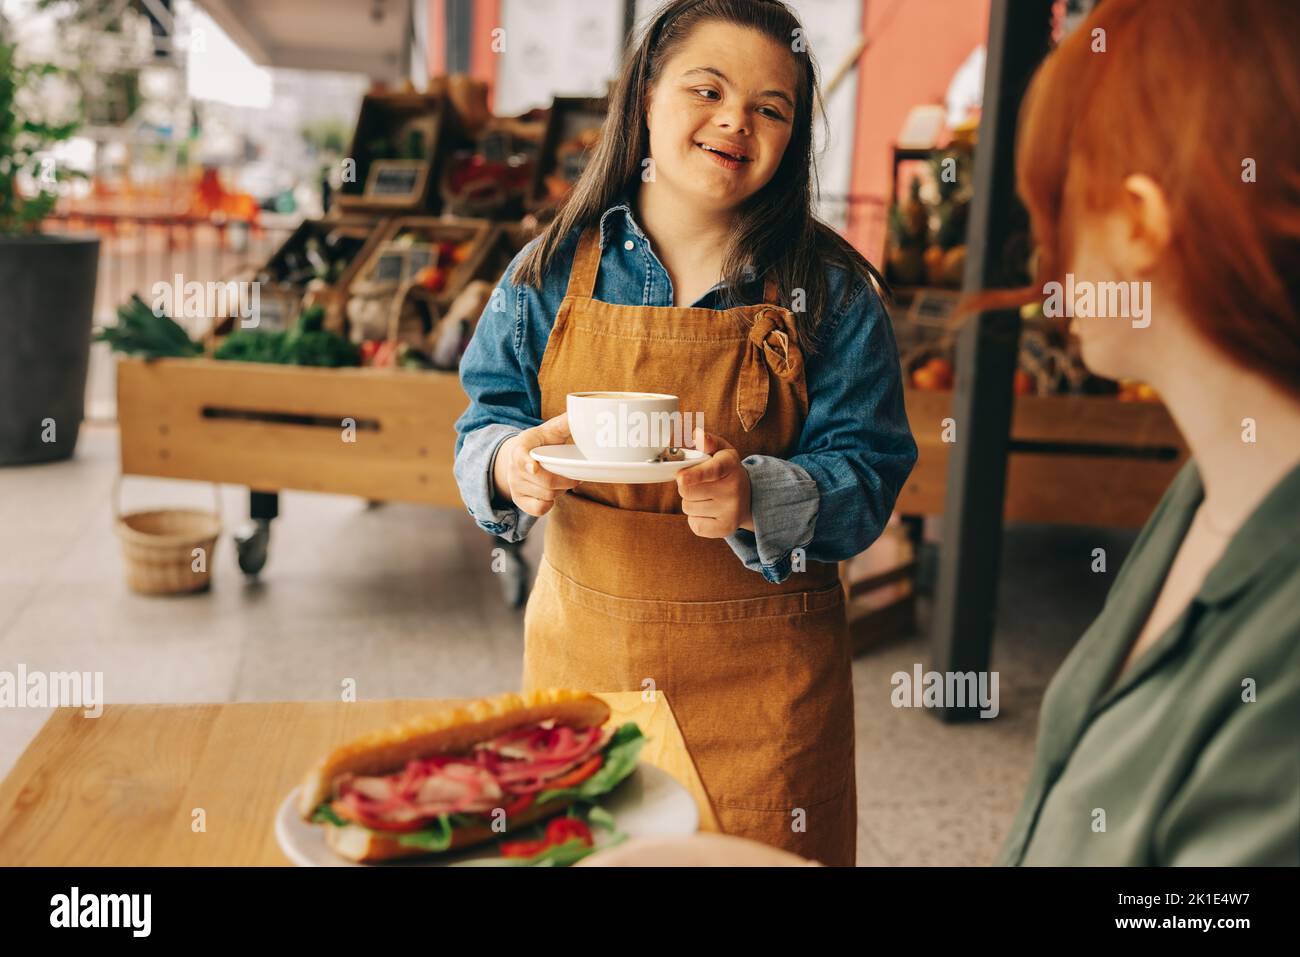 Friendly waitress with Down syndrome serving a customer a sandwich and coffee in a trendy cafe. Professional woman with an intellectual disability wor Stock Photo